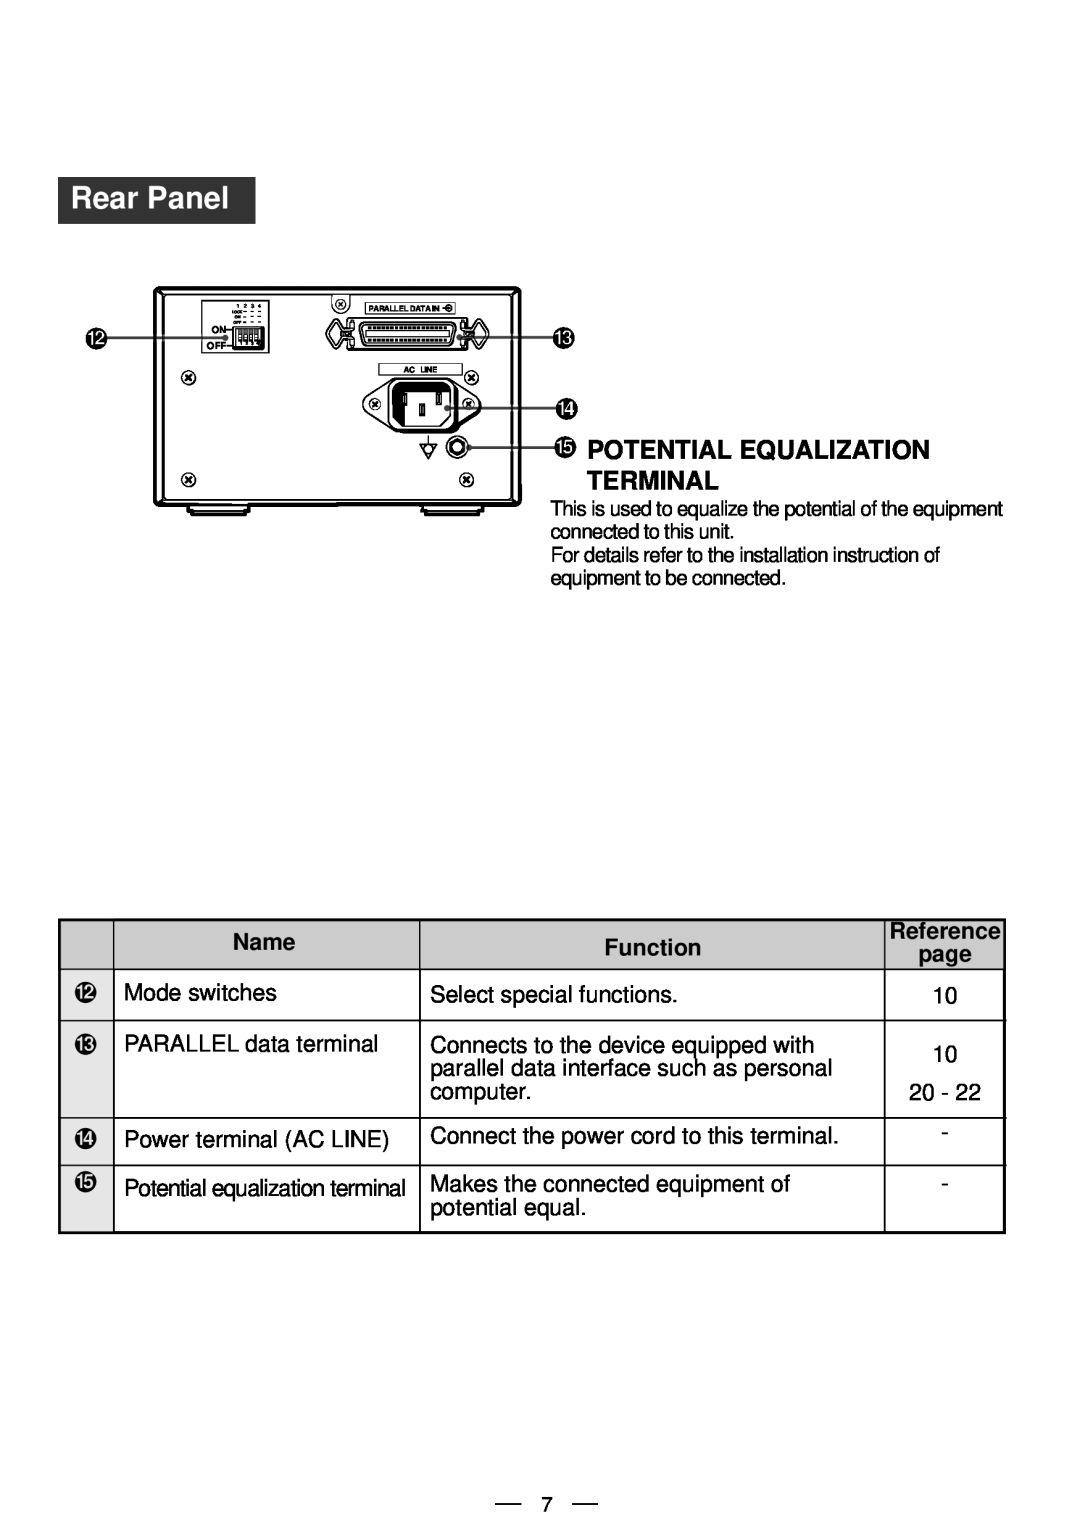 Mitsubishi Electronics P91DW operation manual Rear Panel, Potential Equalization Terminal, Name, Function, Reference, page 